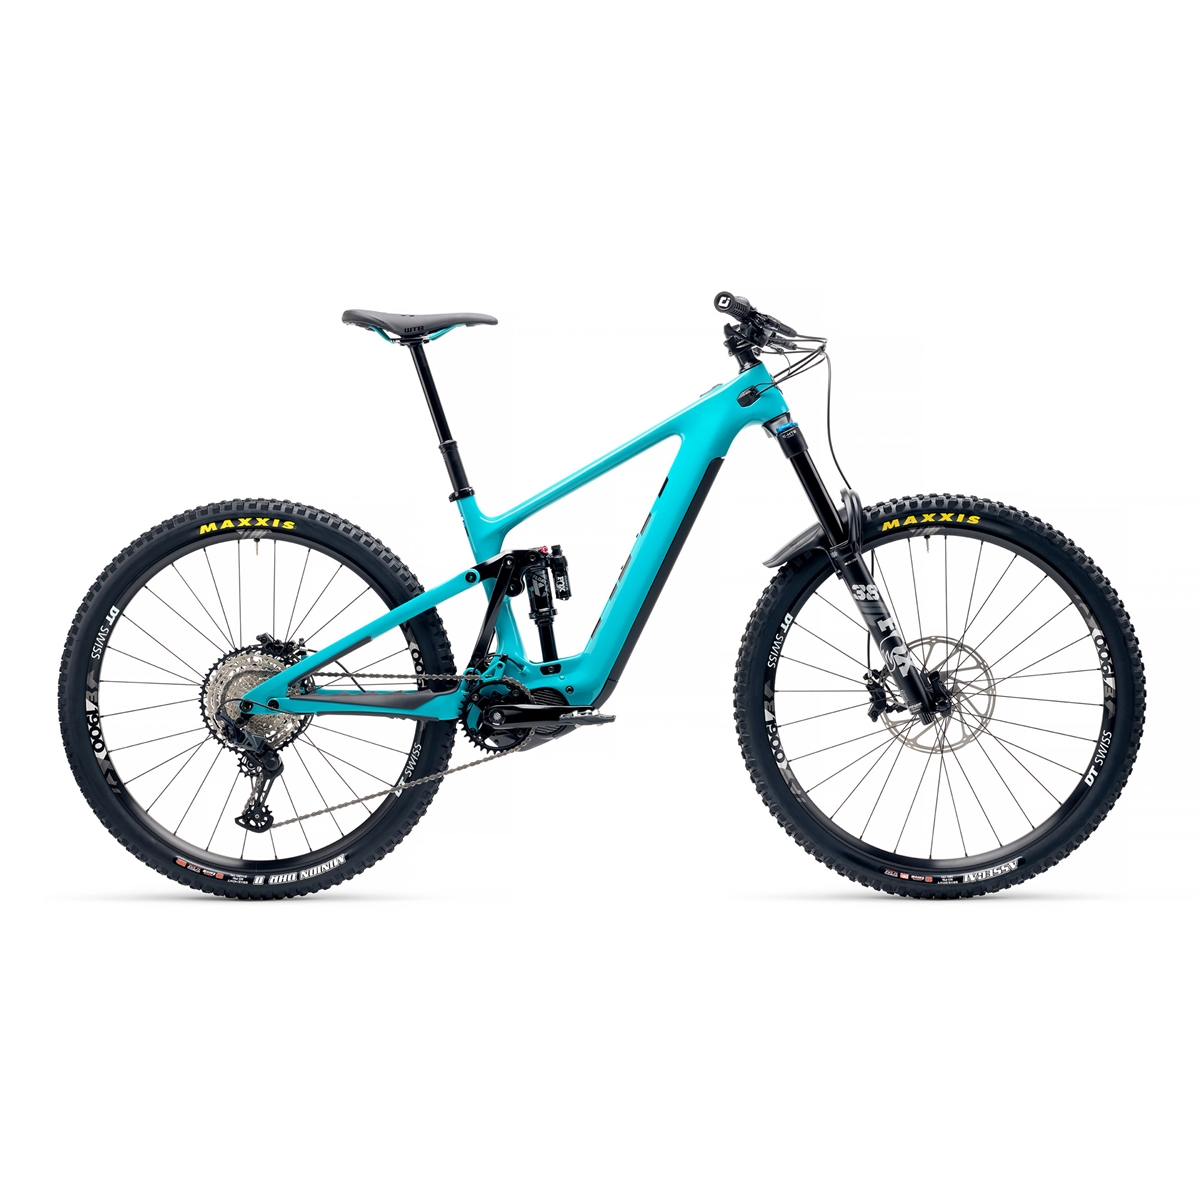 160E C1 29'' 170mm 12s 630Wh Shimano EP8 Turquoise Size S